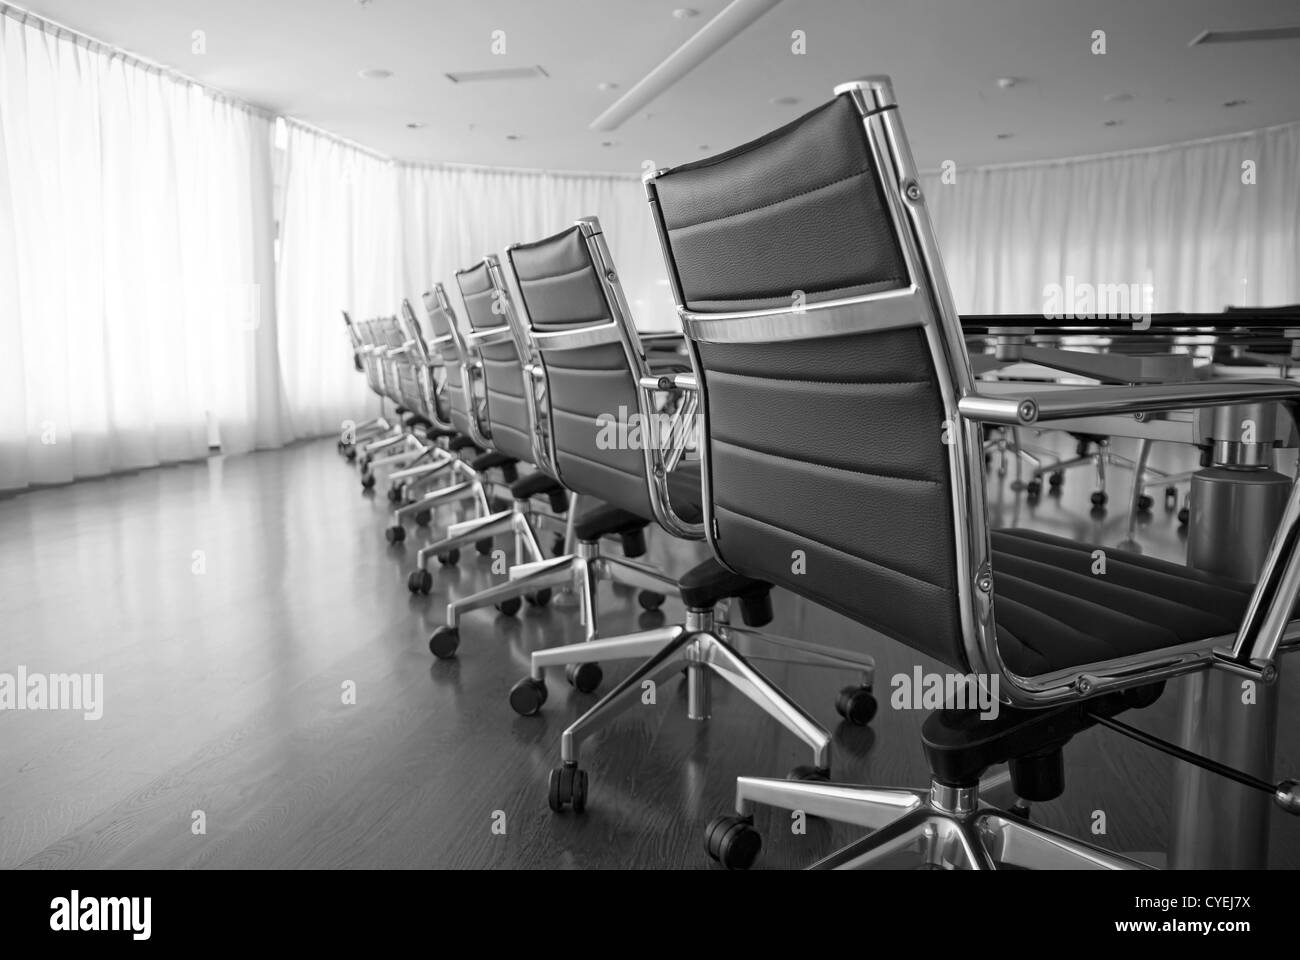 board room, office, work place, conference, chairs, table Stock Photo